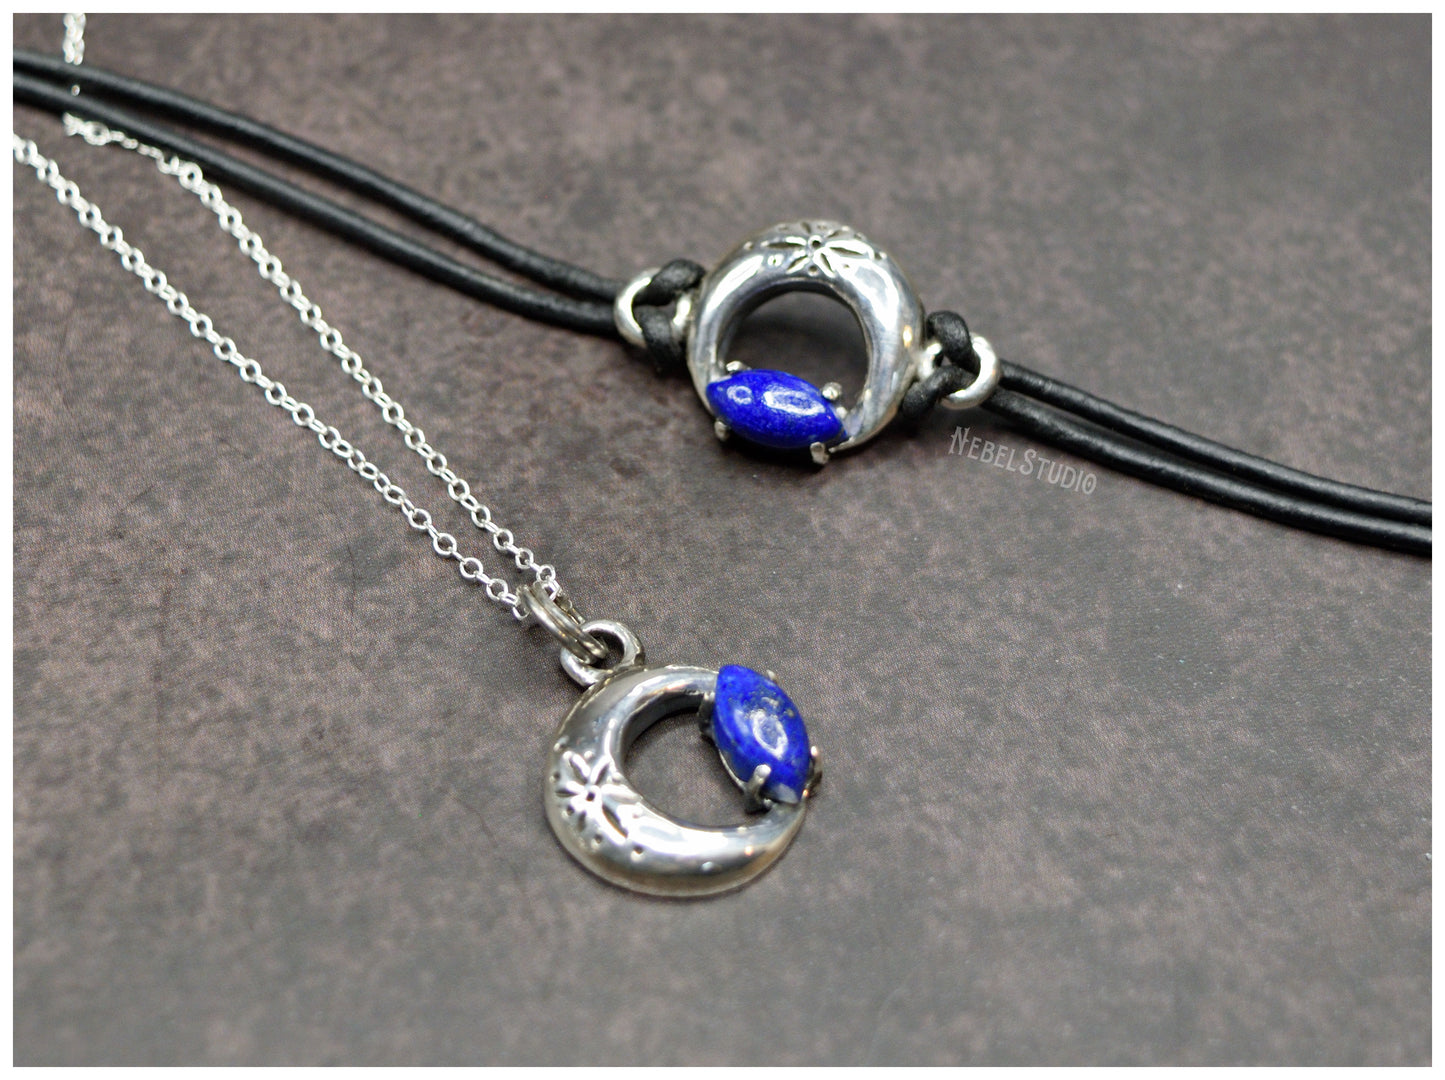 Silver Moon pendant with marquise cut lapis lazuli Limited Edition